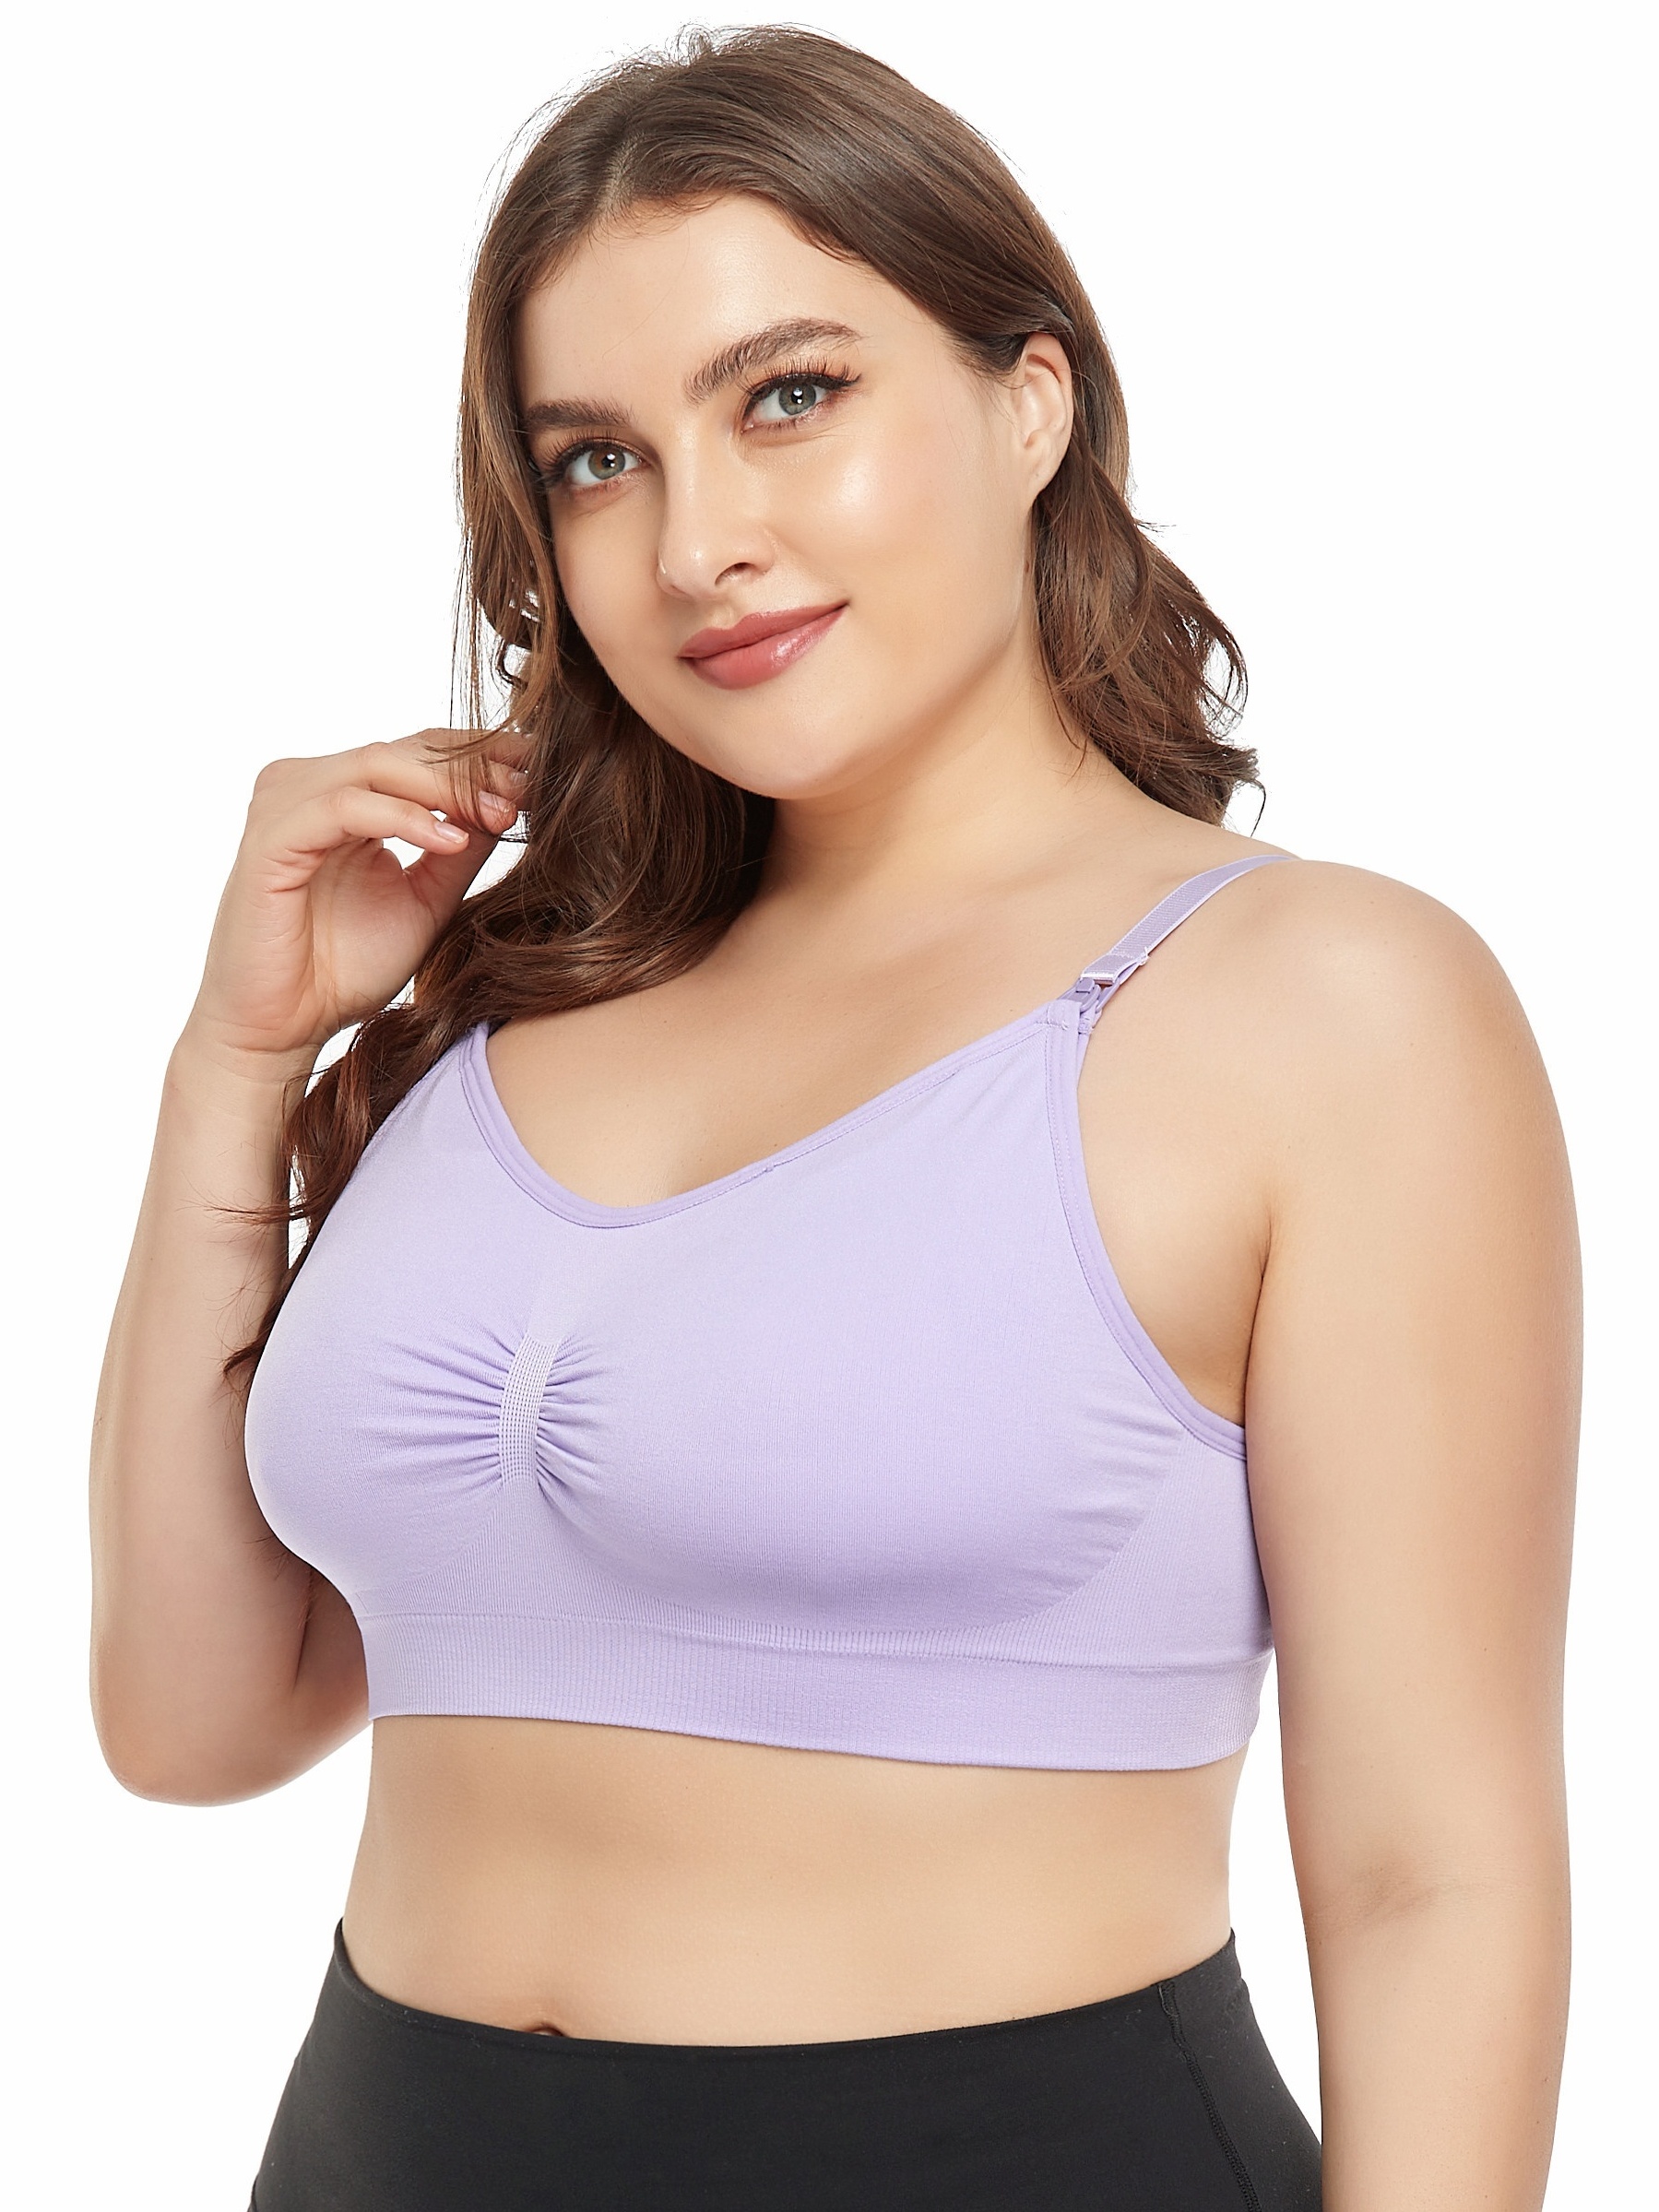 gvdentm Maternity Bra Pure Comfort Bralette with Smoothing Fit, Wireless  Bra, No-Roll Lightweight T-Shirt Bra for Everyday Wear 